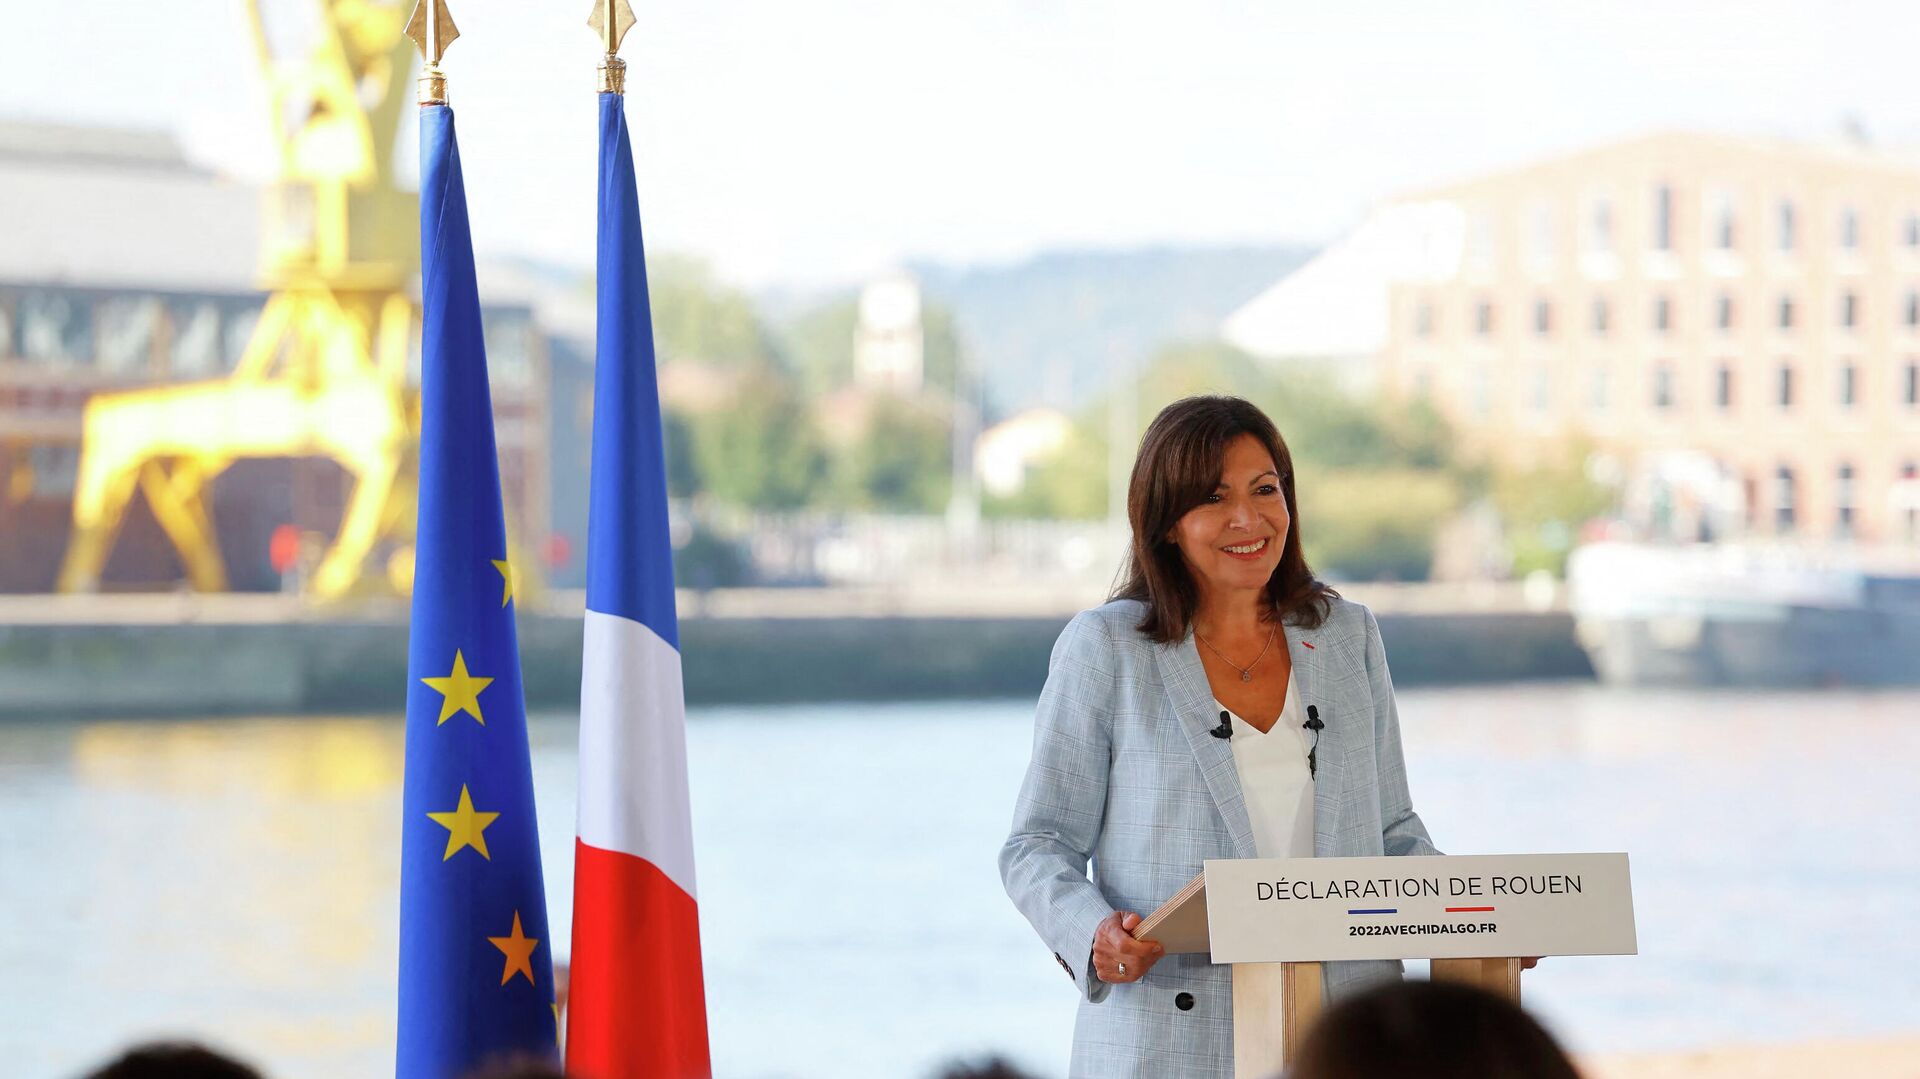 The mayor of Paris, member of the French Socialist Party (Parti Socialiste - PS) Anne Hidalgo speaks in Rouen, western France, on September 12, 2021 as she announced that she plans to stand as a PS candidate in next year's presidential elections - Sputnik International, 1920, 12.09.2021